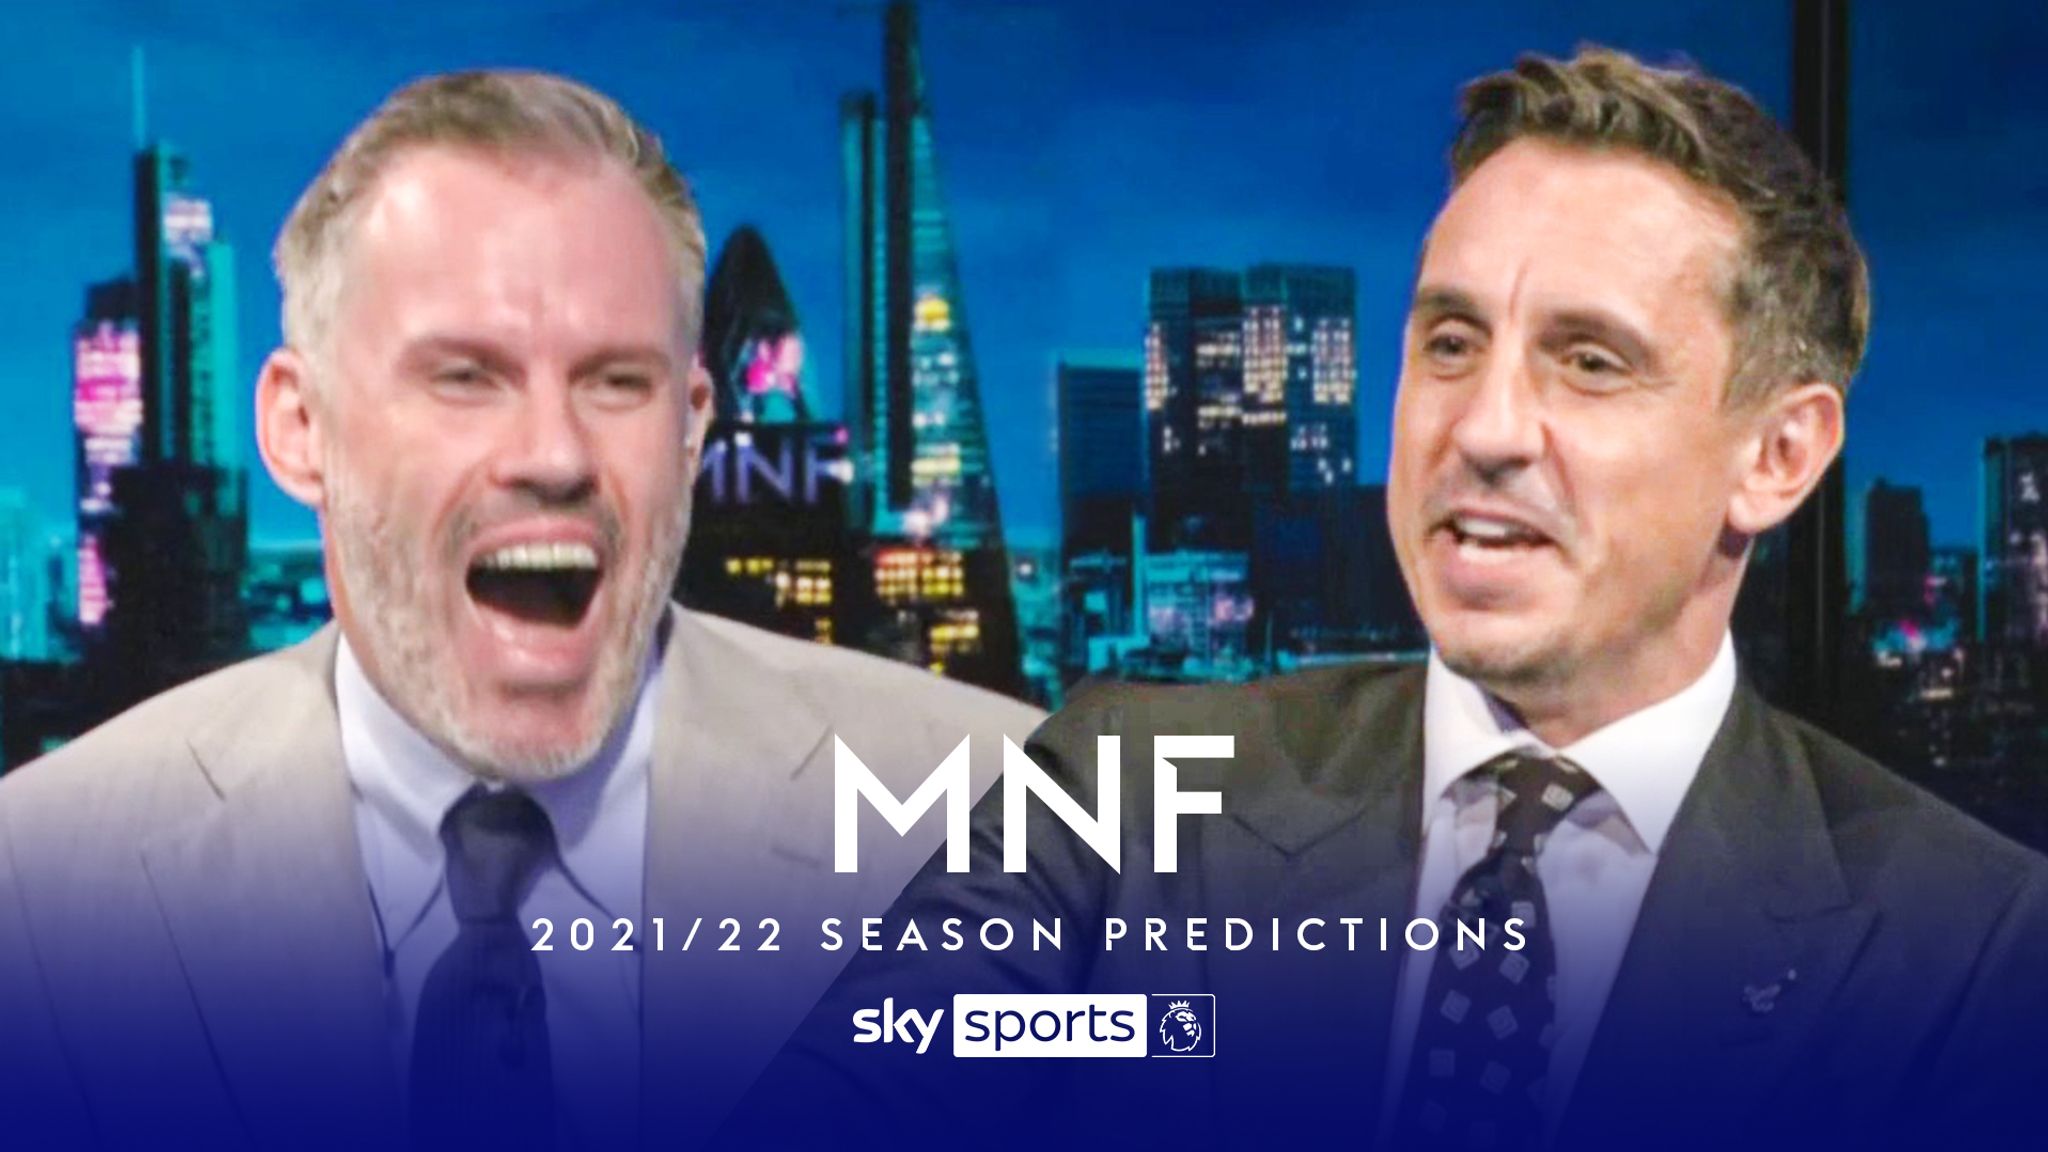 afcstuff on X: Jamie Carragher & Gary Neville's 'Monday Night Football'  Premier League predictions from August, which include Carragher naming  Emile Smith Rowe as 'Young Talent' & Neville naming Arsenal as  'Underachievers'. [